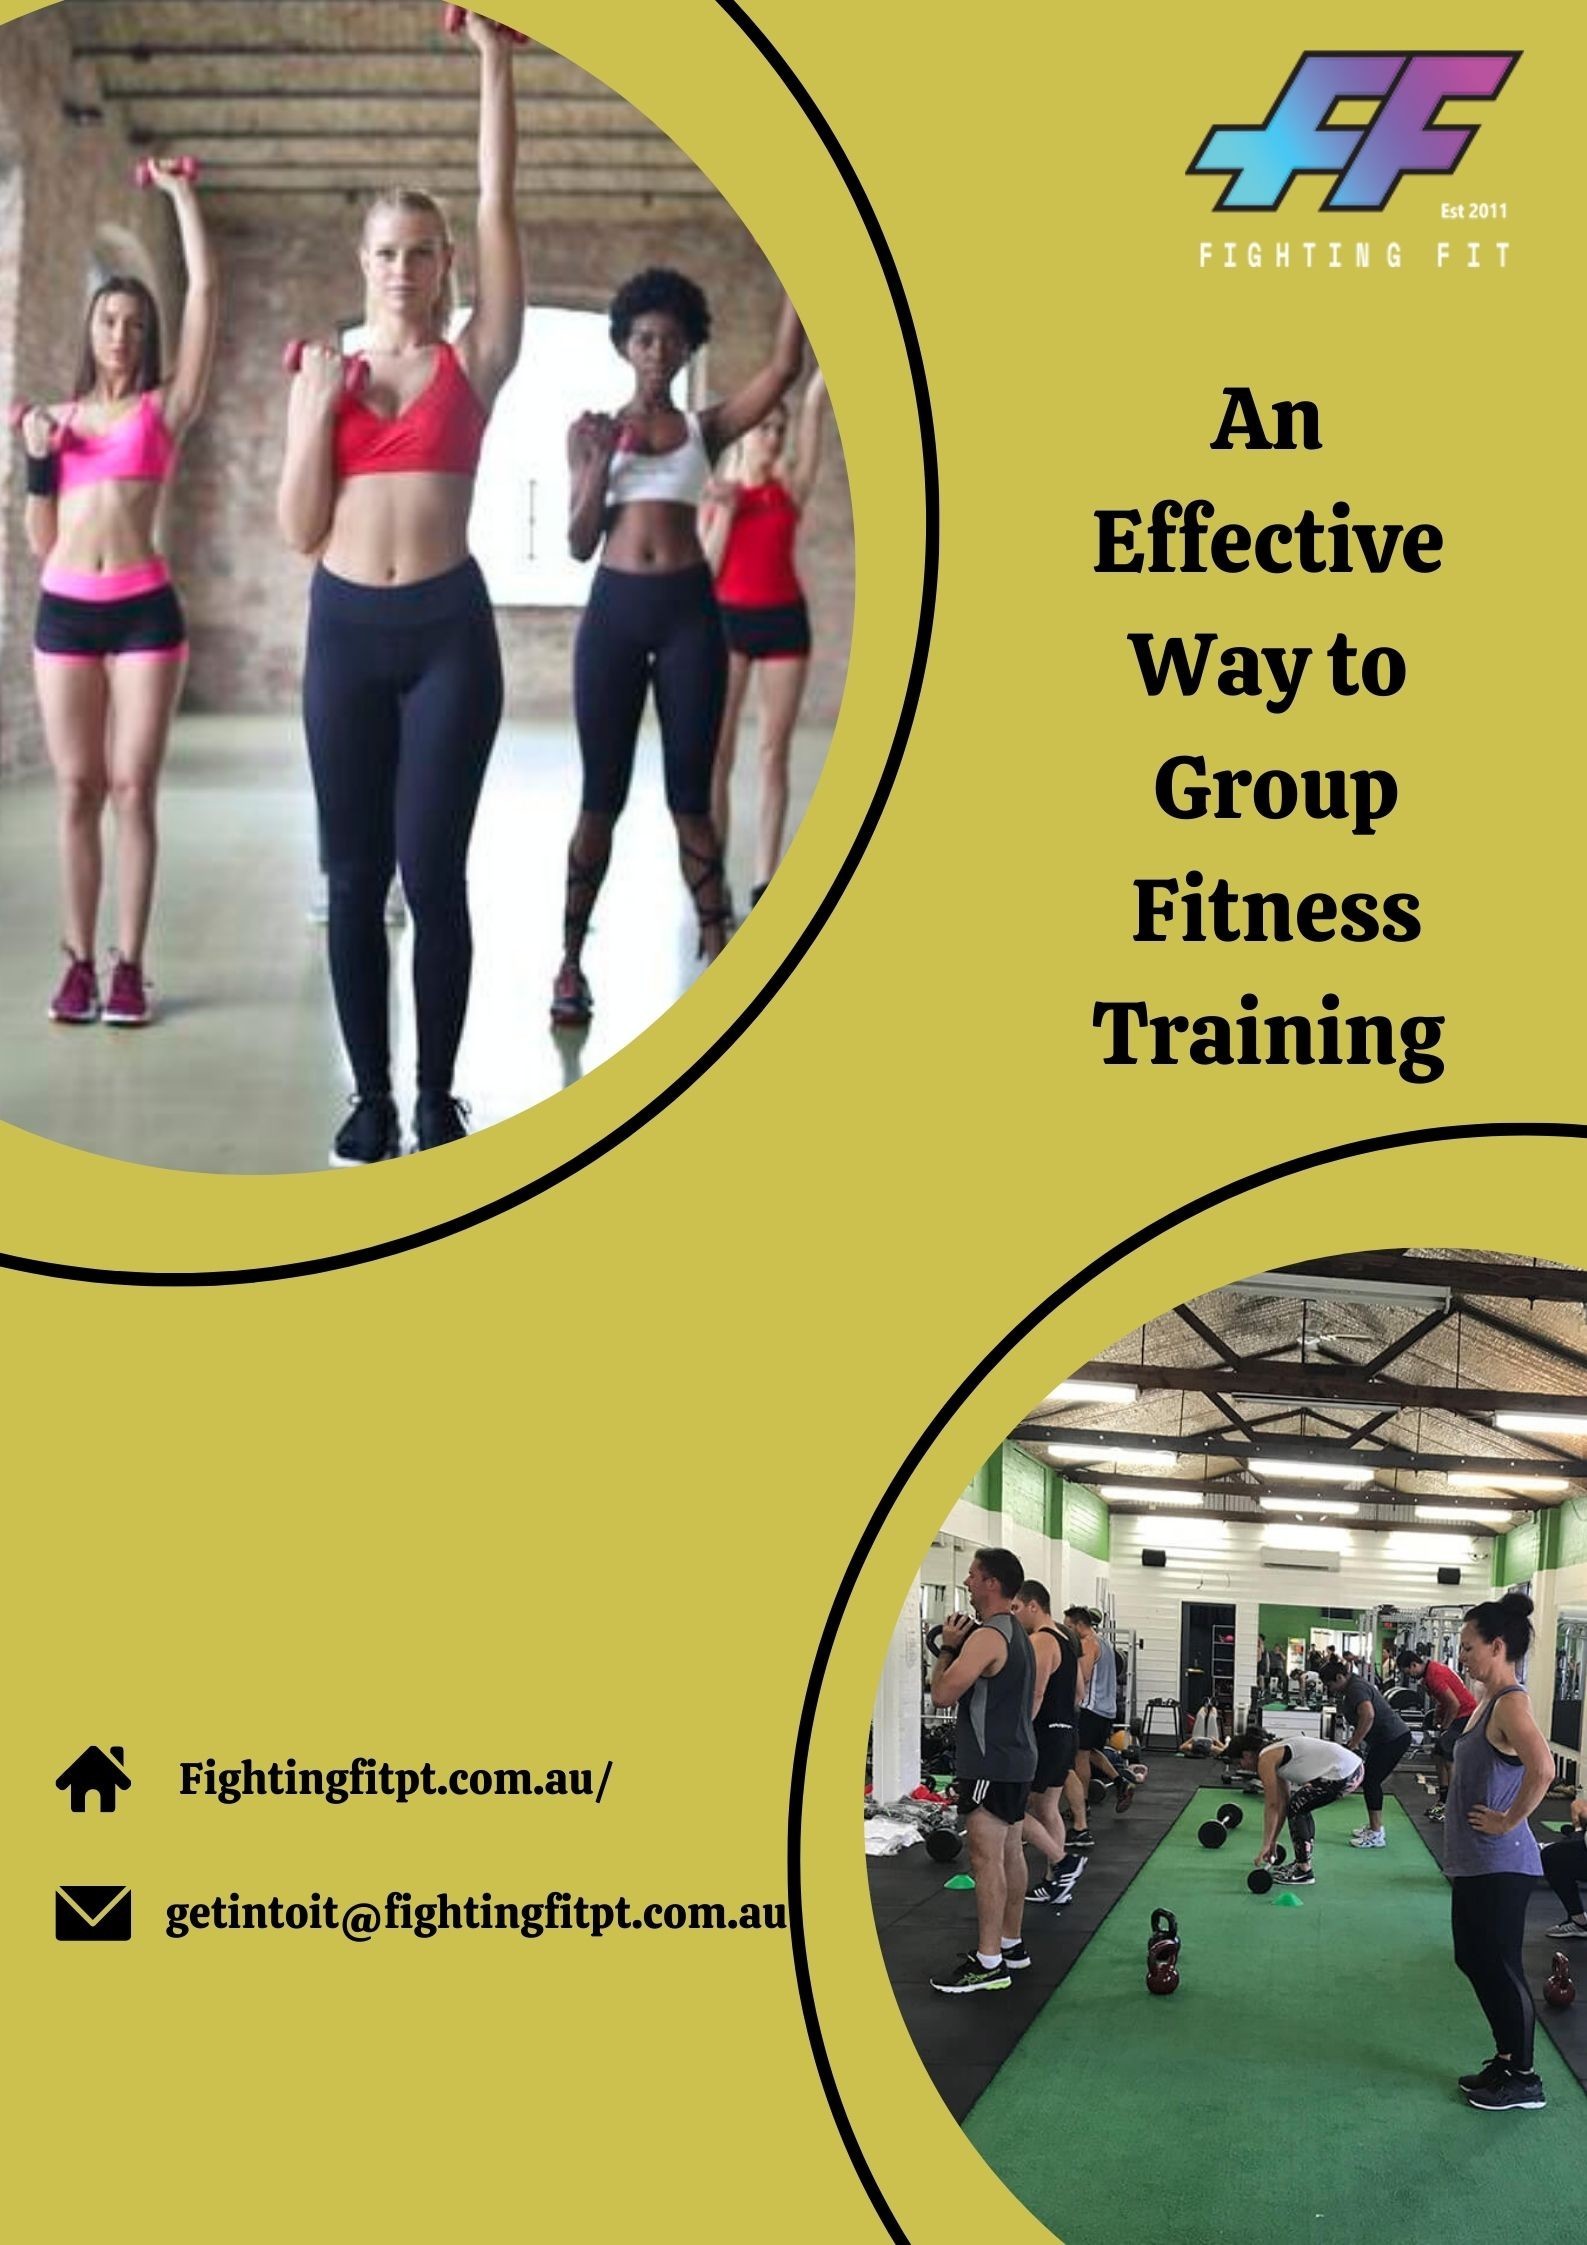 An Effective Way to Group Fitness Training